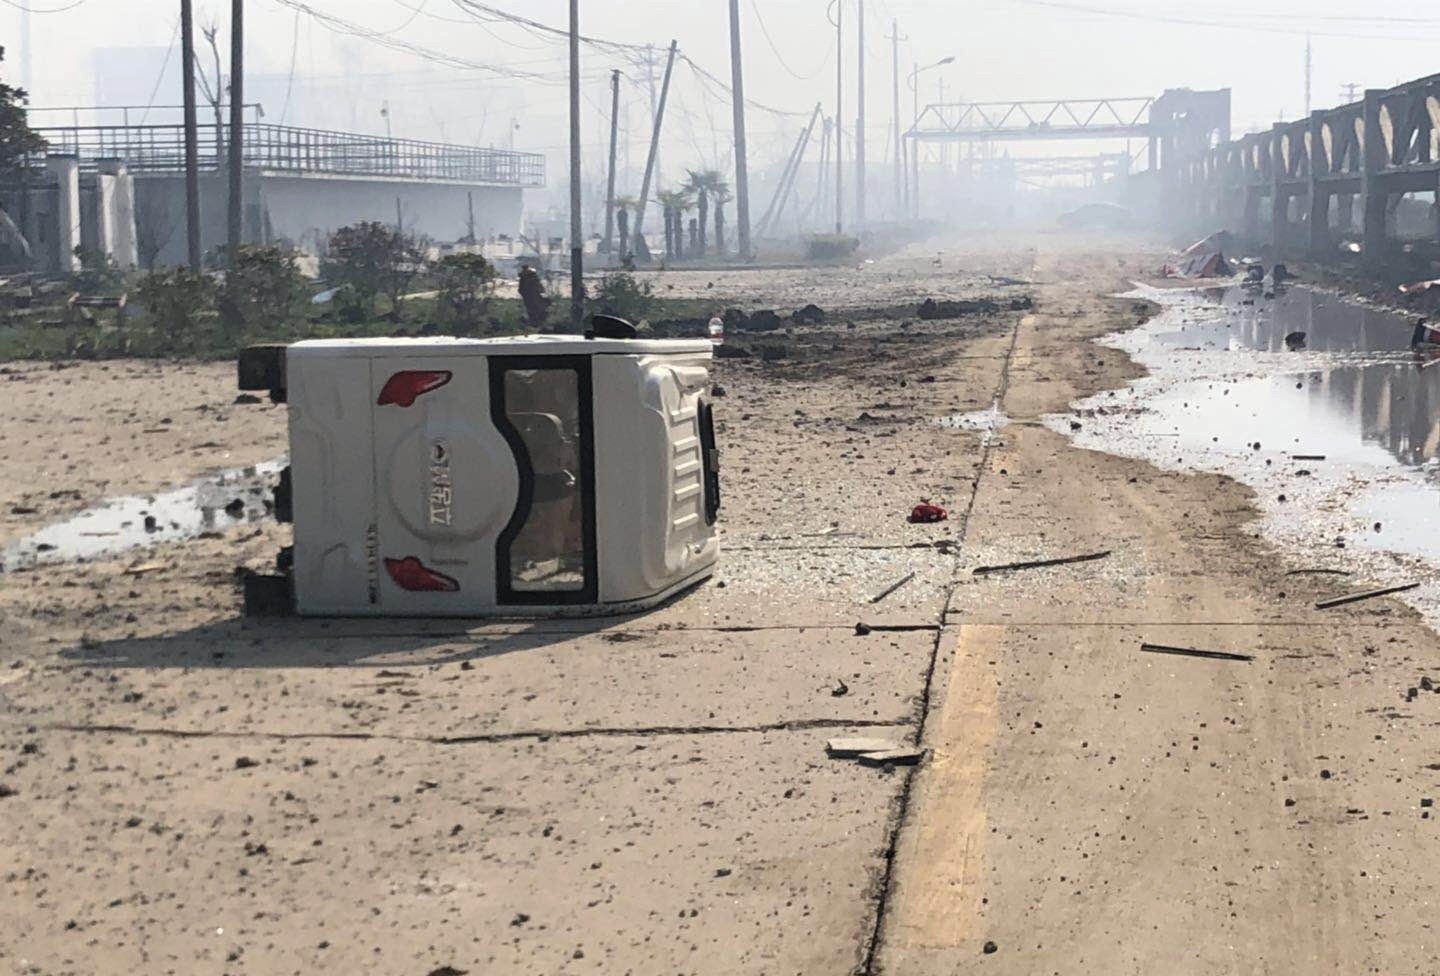 Residents and environmental groups had concerns over safety and pollution at the factory in Yancheng, Jiangsu before the explosion. Photo: Sidney Leng